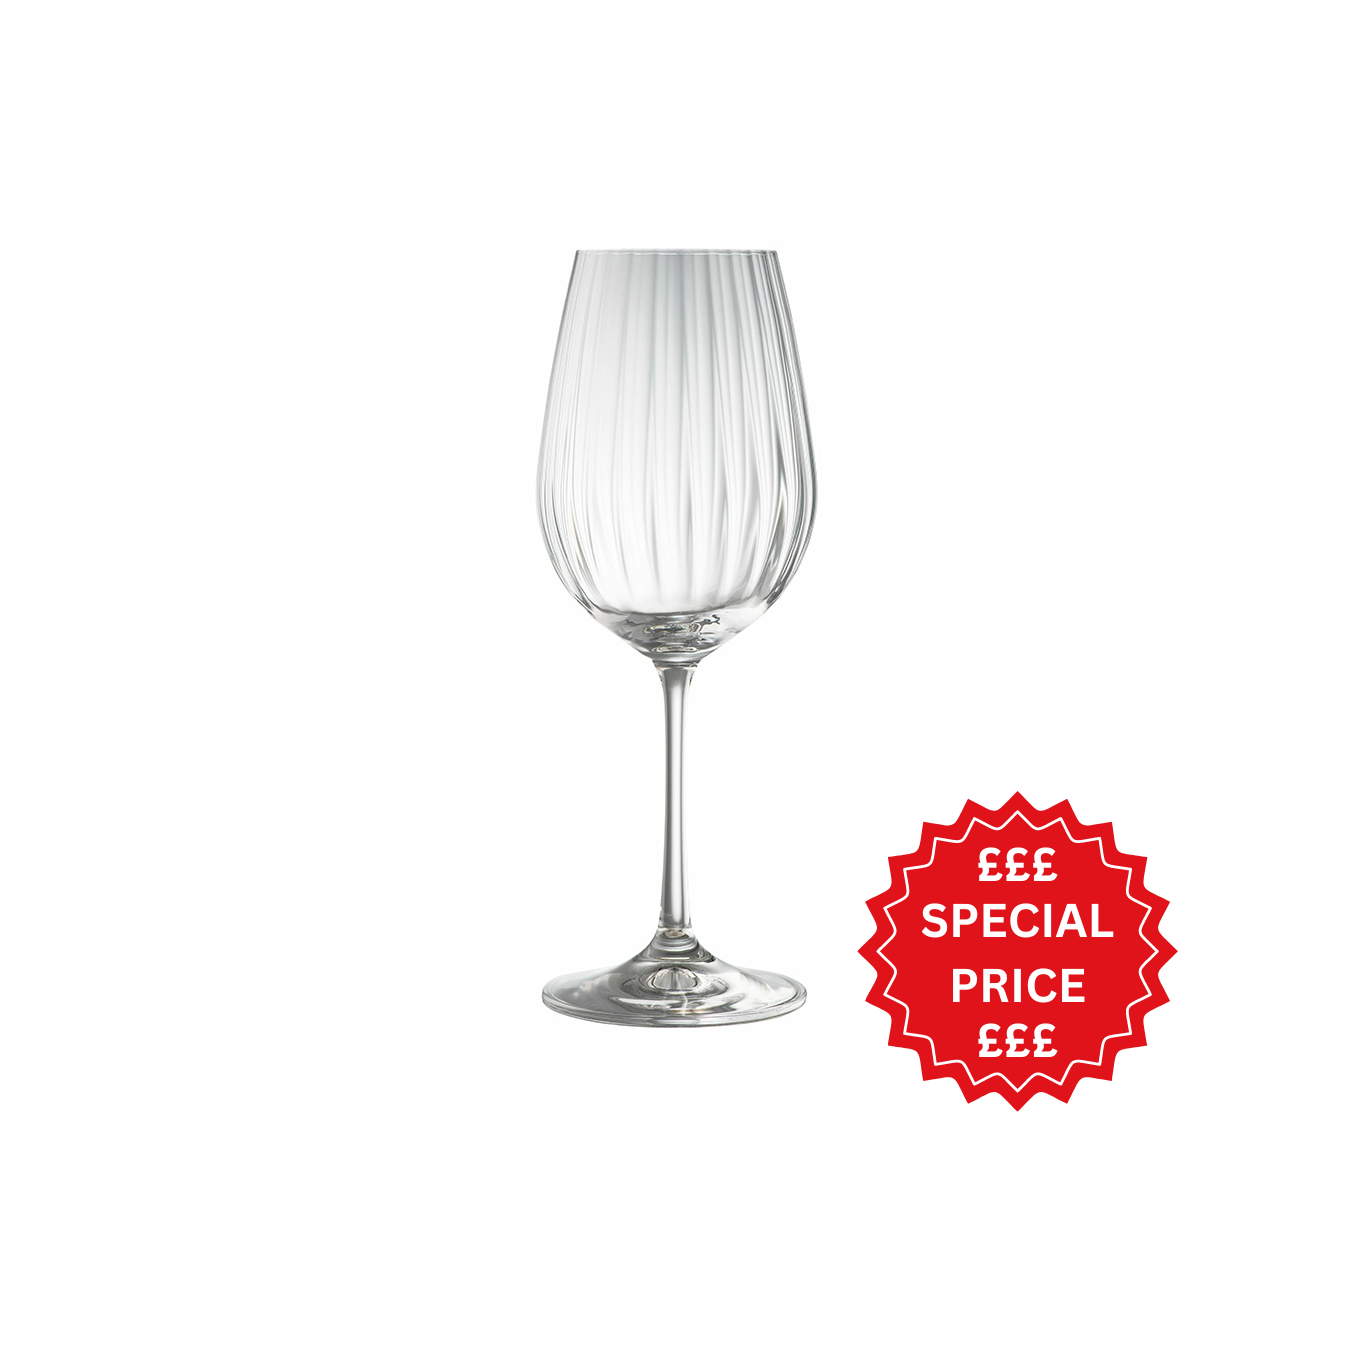 Galway Crystal Erne Wine Glass